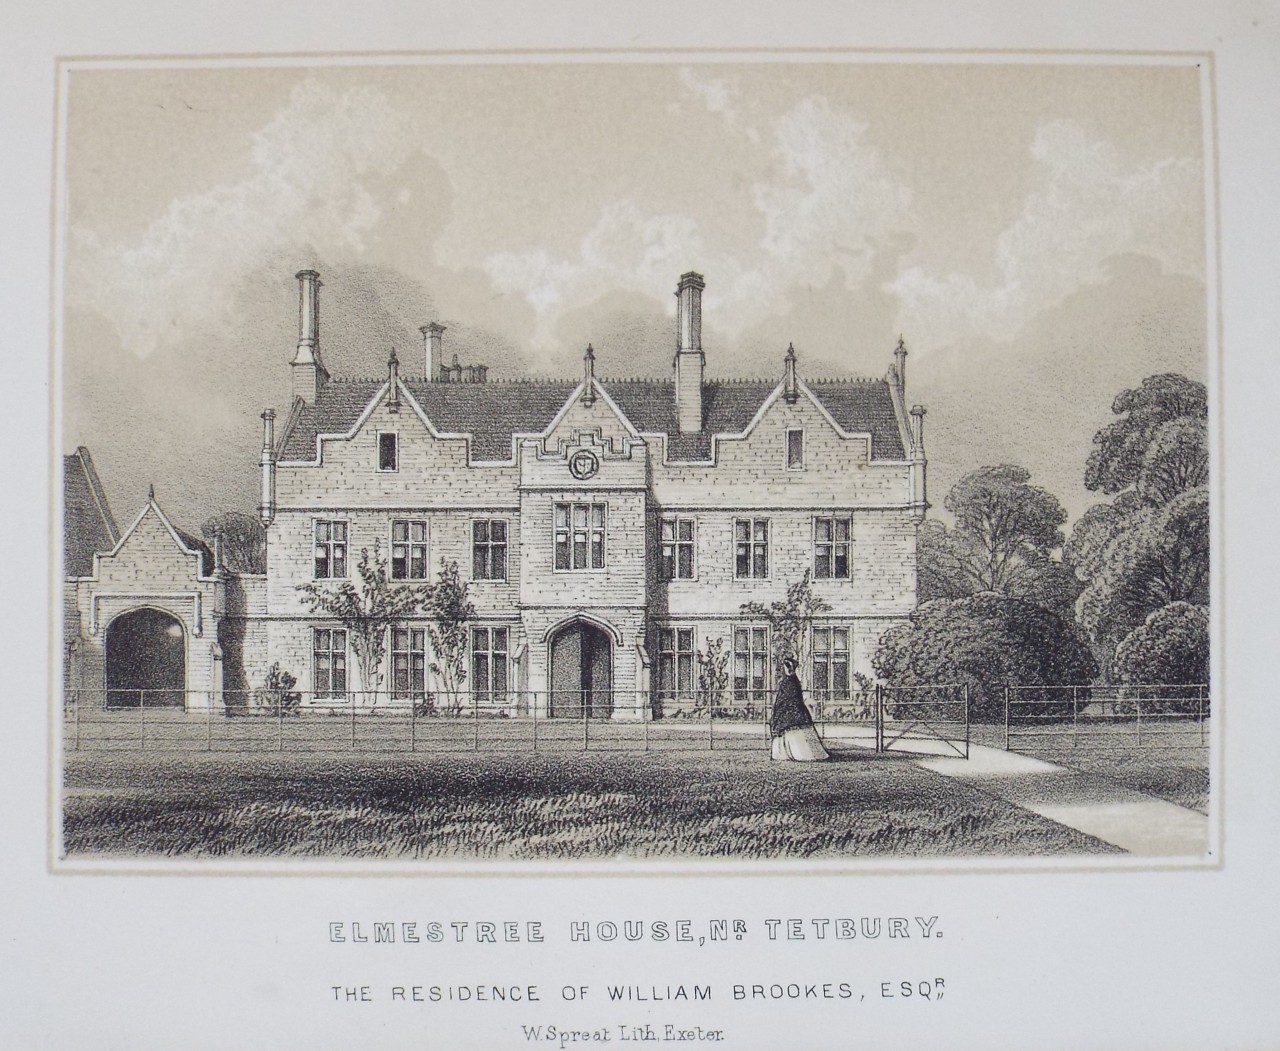 Lithograph - Elmestree House, Nr. Tetbury. The Residence of William Brookes, Esqr. - Spreat